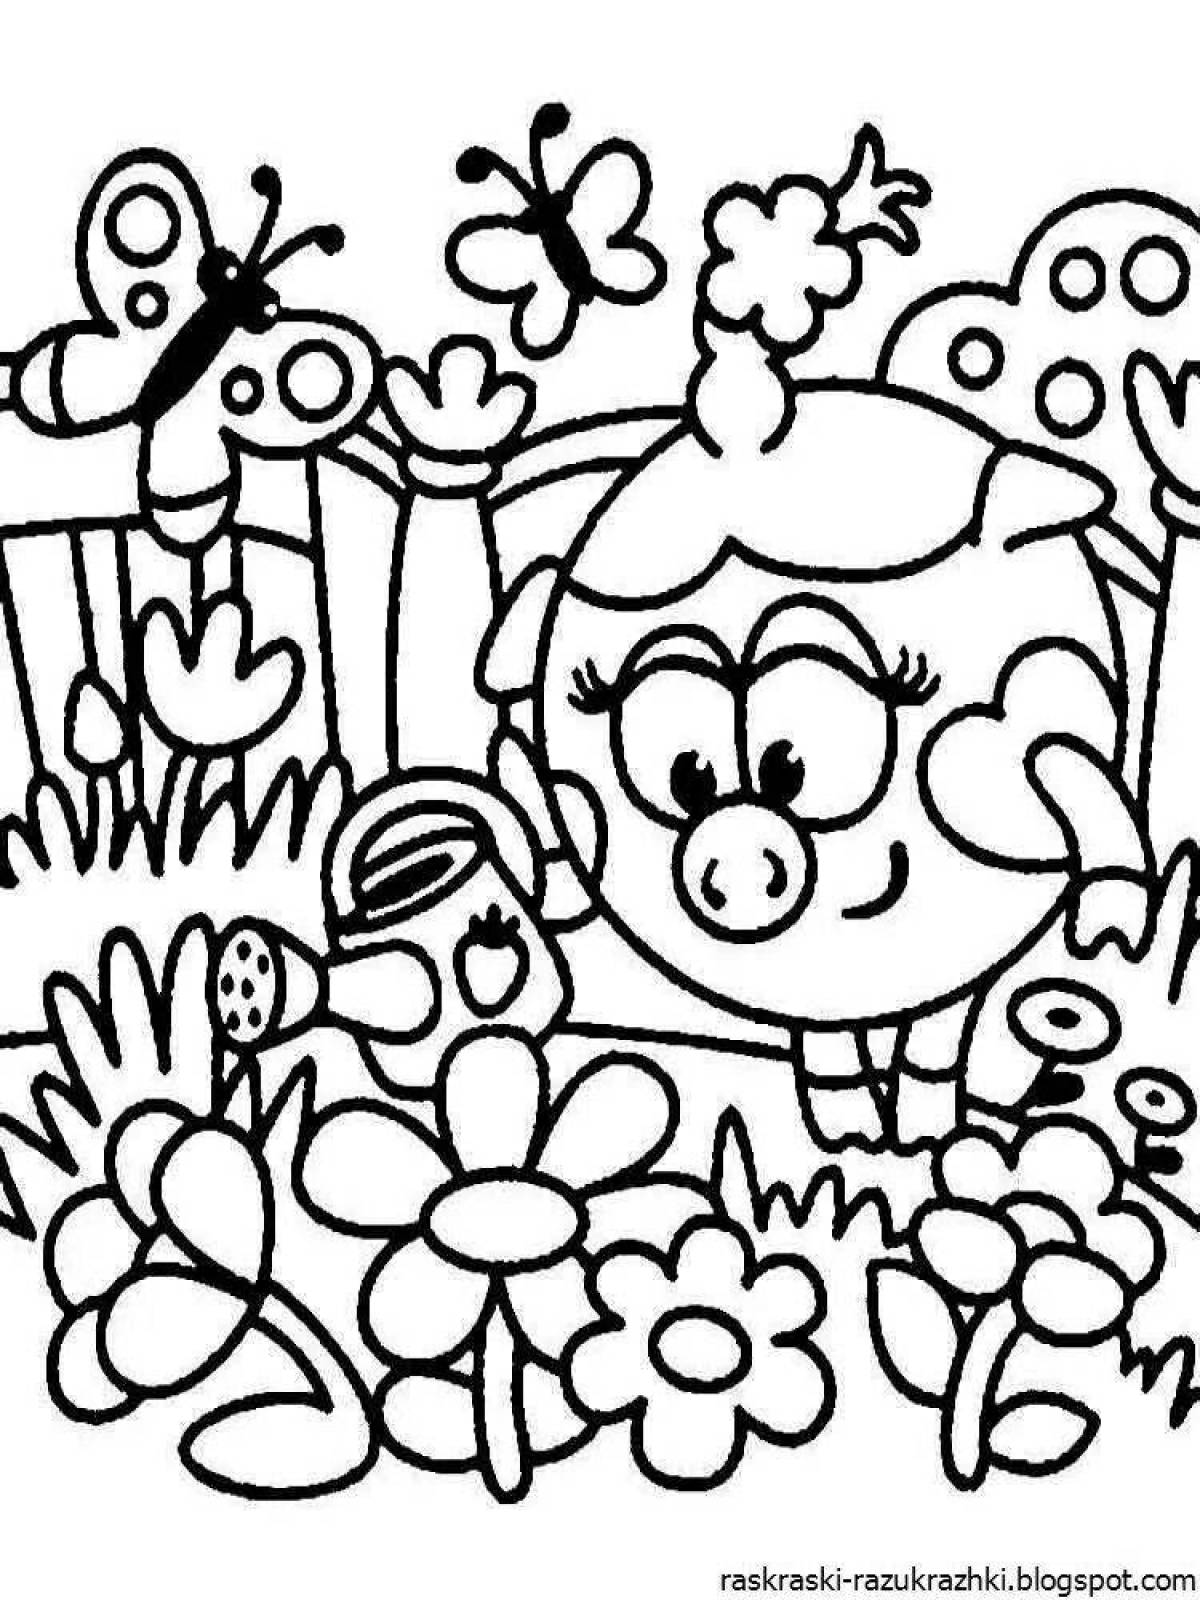 Fancy smeshariki coloring pages